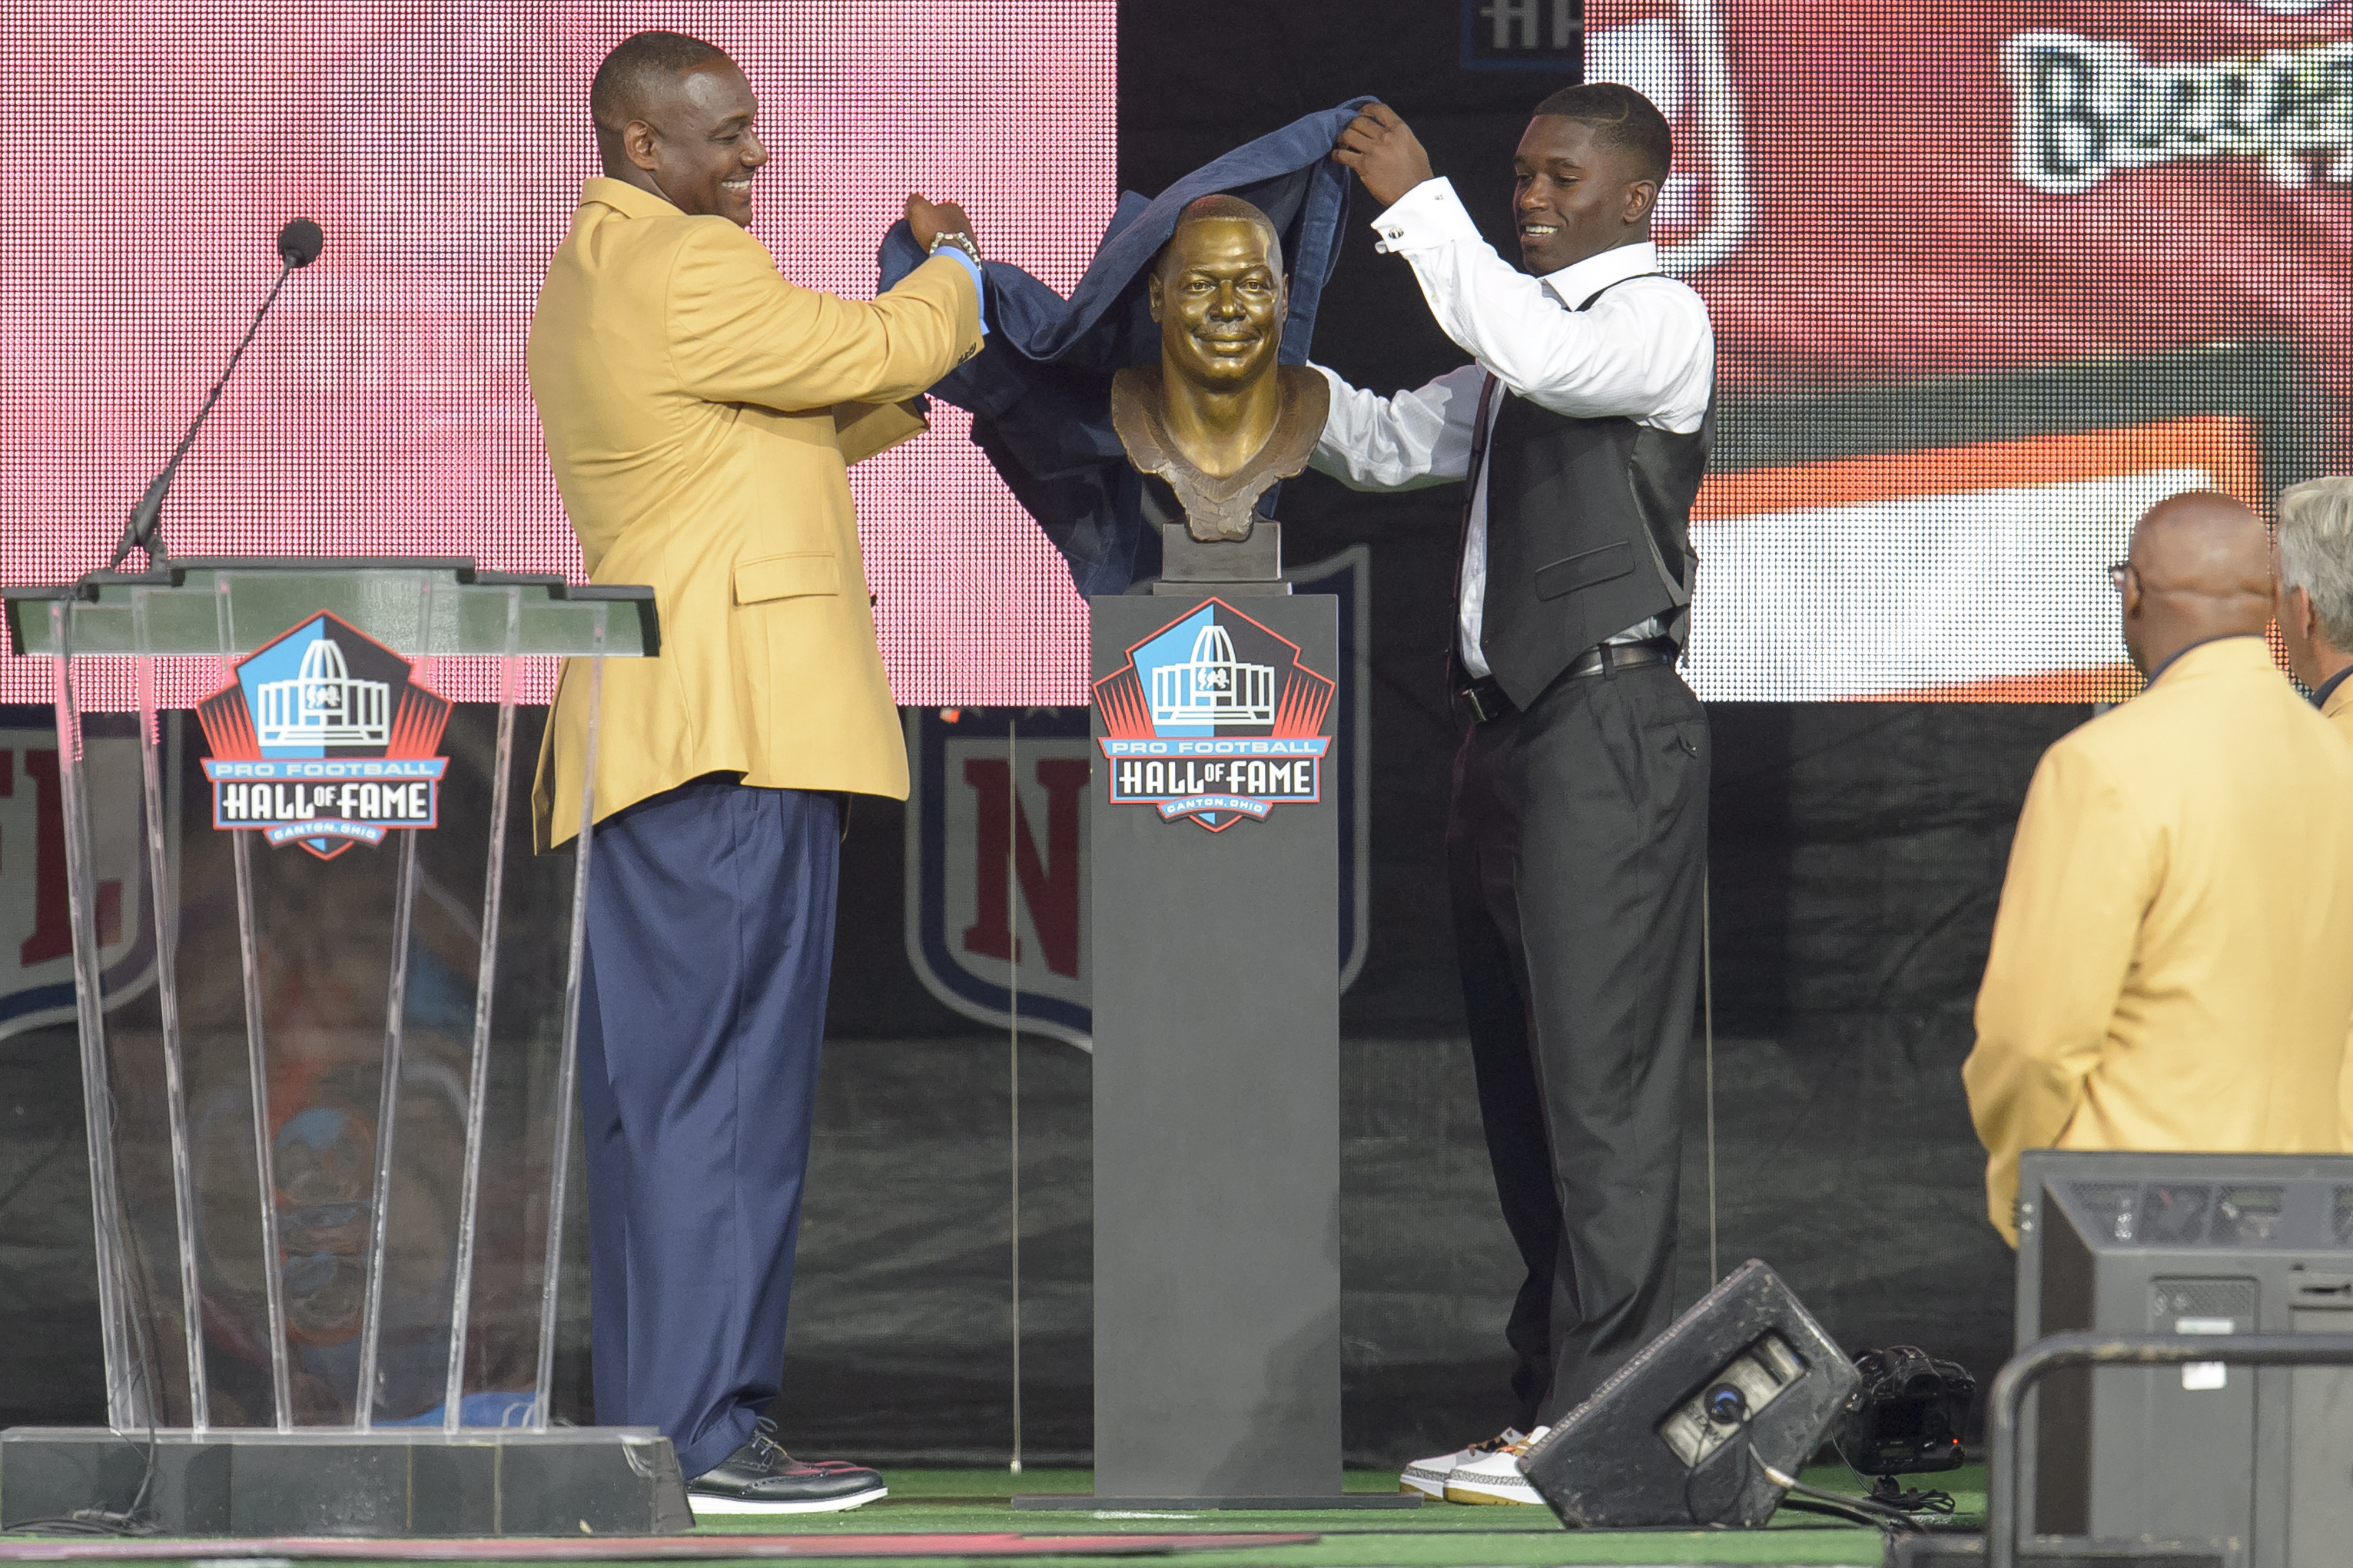 CANTON, OH - AUGUST 2: Former Tampa Buccaneers linebacker Derrick Brooks, left, unveils his bust with his son Decalon Brooks, right, during the NFL Class of 2014 Pro Football Hall of Fame Enshrinement Ceremony at Fawcett Stadium on August 2, 2014 in Canton, Ohio. (Photo by Jason Miller/Getty Images)